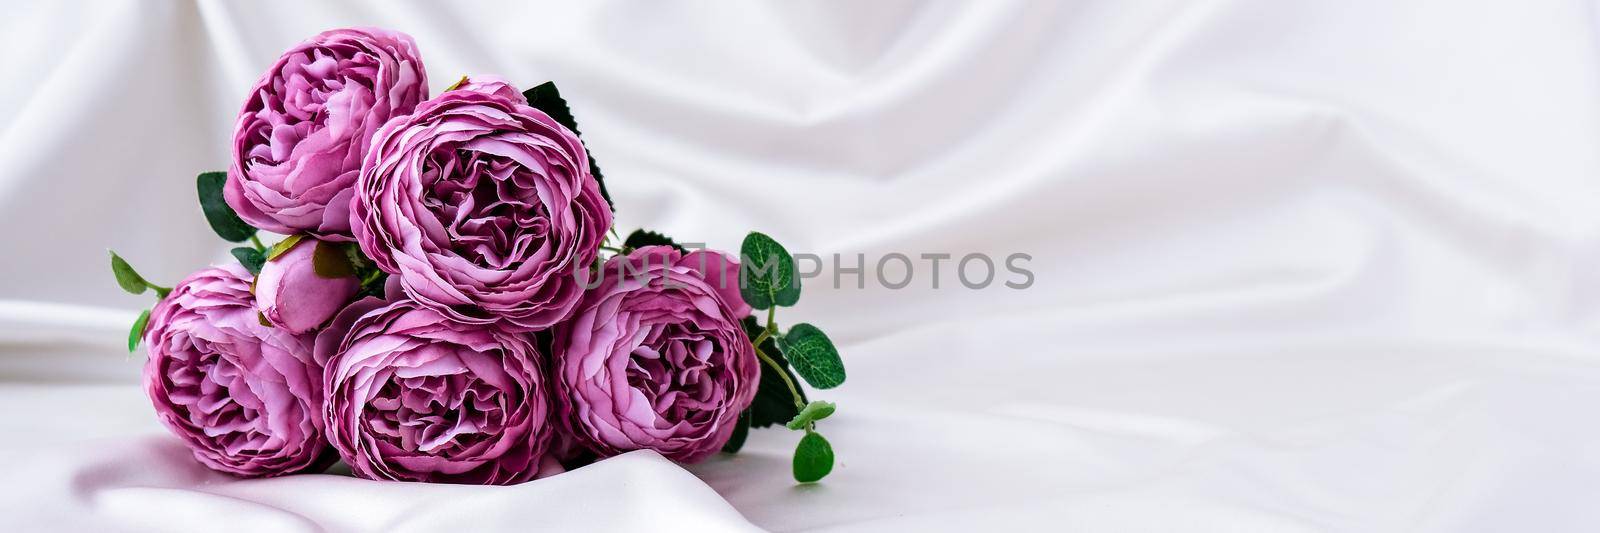 Bouquet of beautiful violet peonies on white silk fabric background. Copy space. Greeting card. Flowers for present